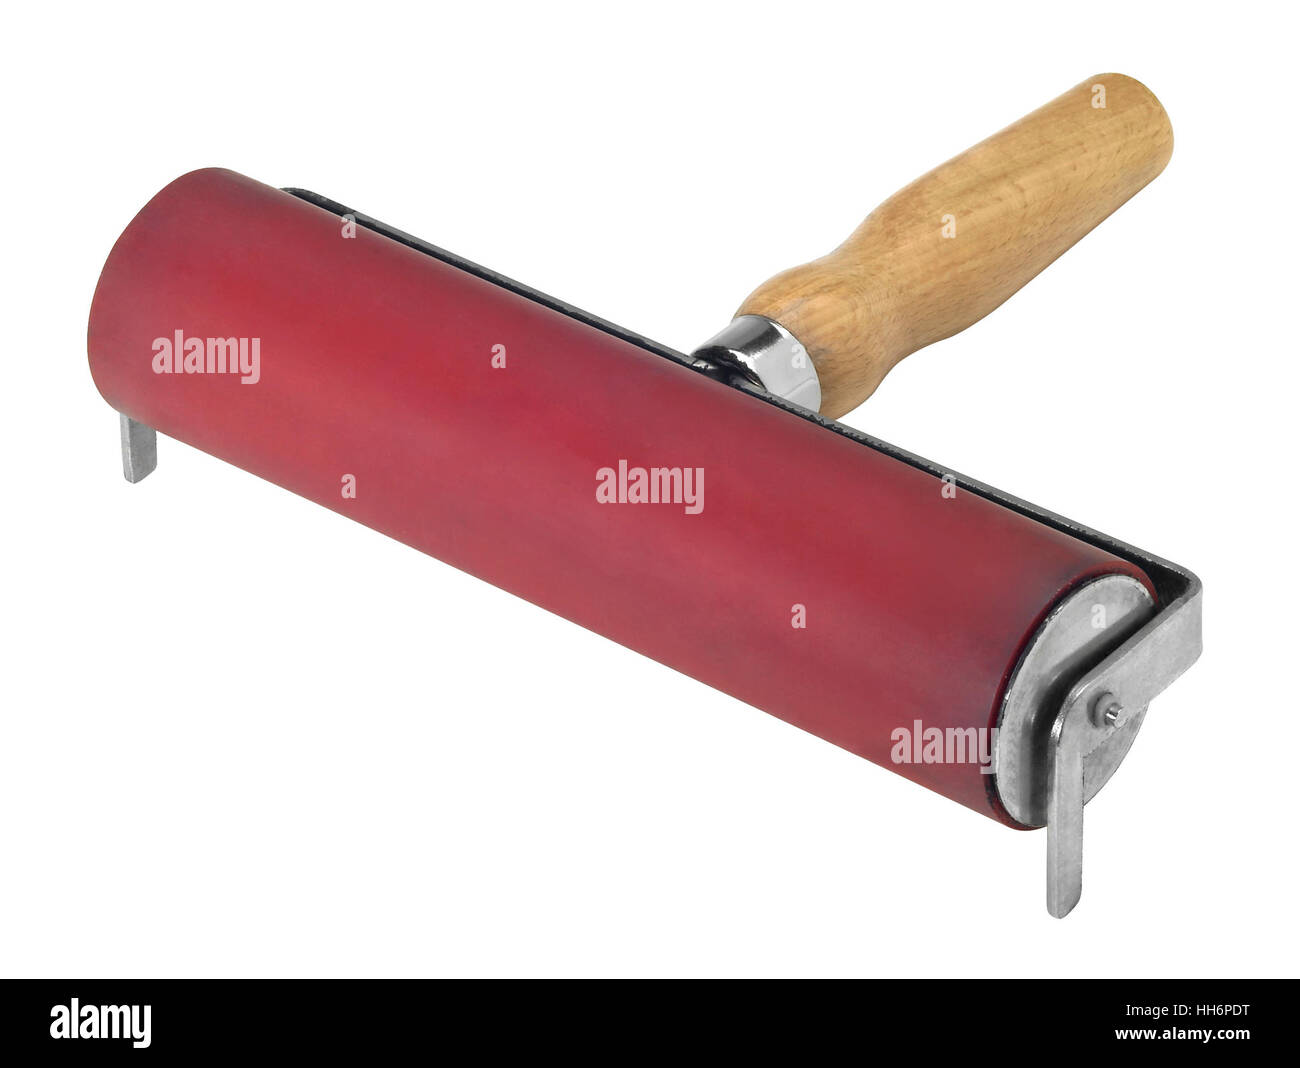 studio photography of a inking roller with red gum and wooden handle, isolated on white with clipping path Stock Photo